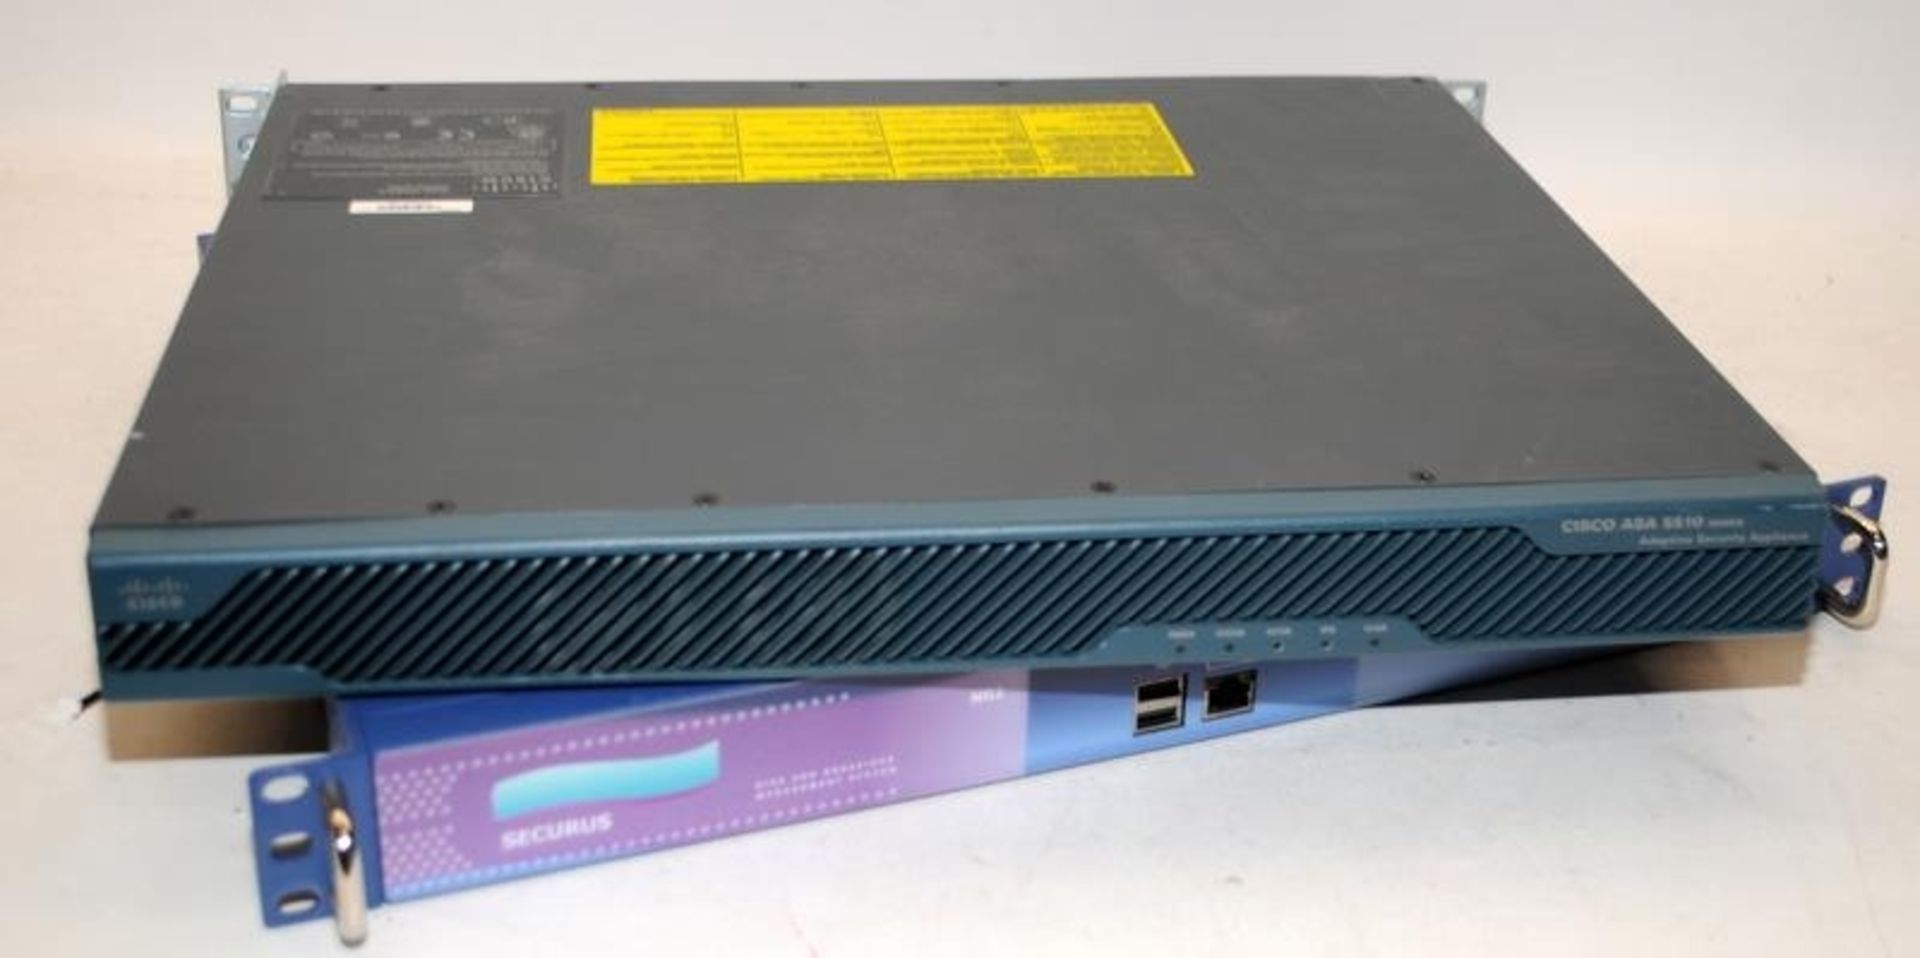 Cisco ASA 5500 and Securus NG2 security servers. Removed from a working environment